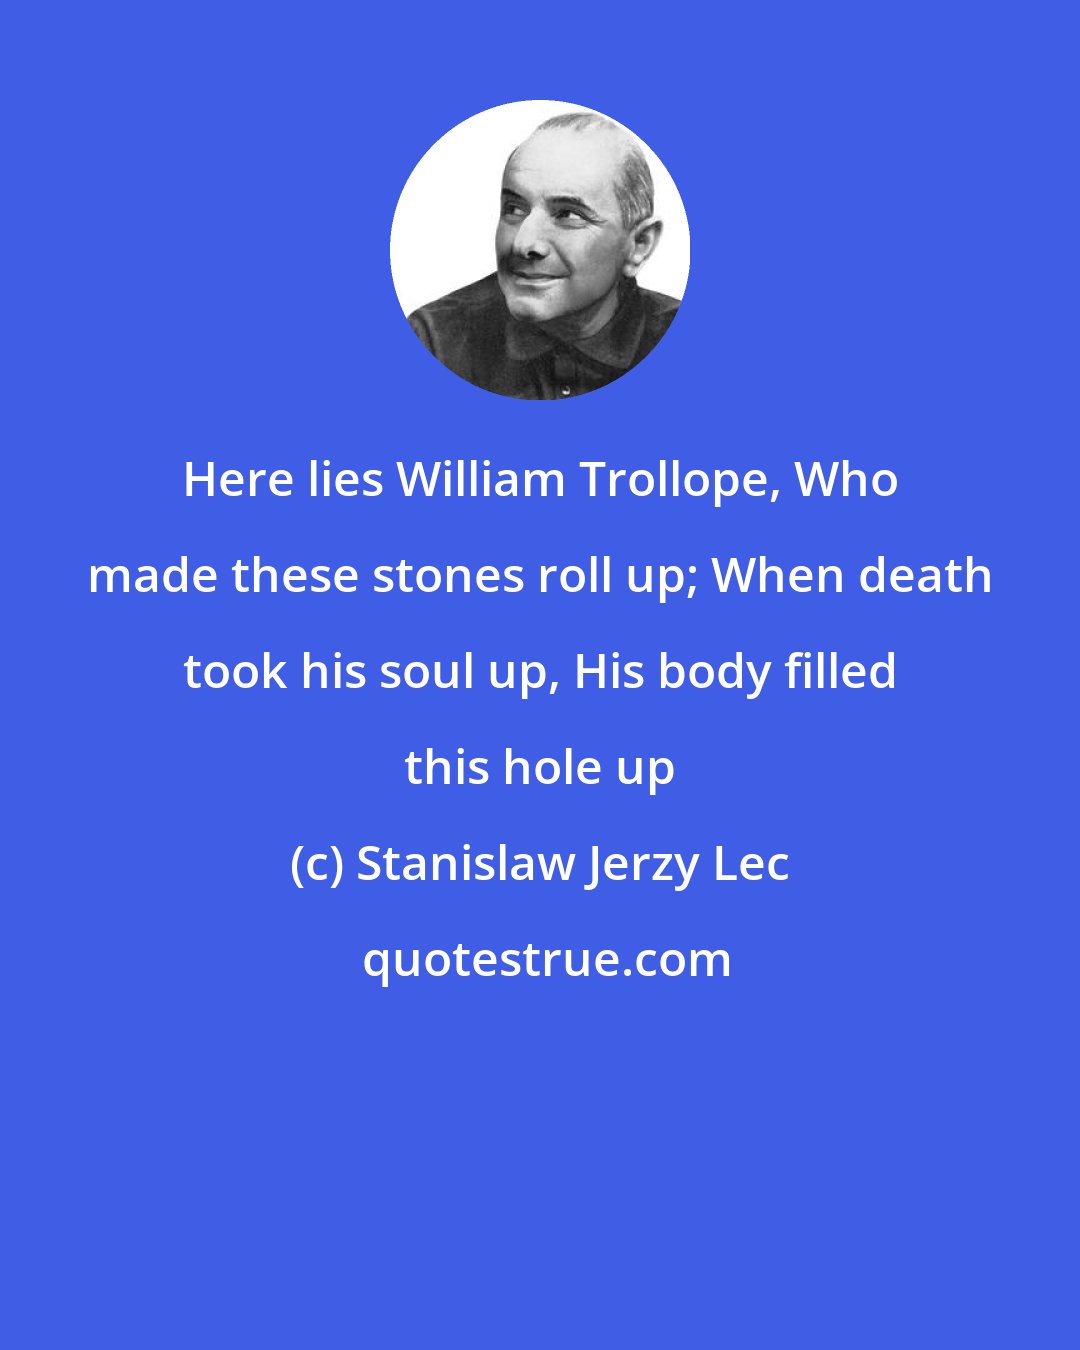 Stanislaw Jerzy Lec: Here lies William Trollope, Who made these stones roll up; When death took his soul up, His body filled this hole up